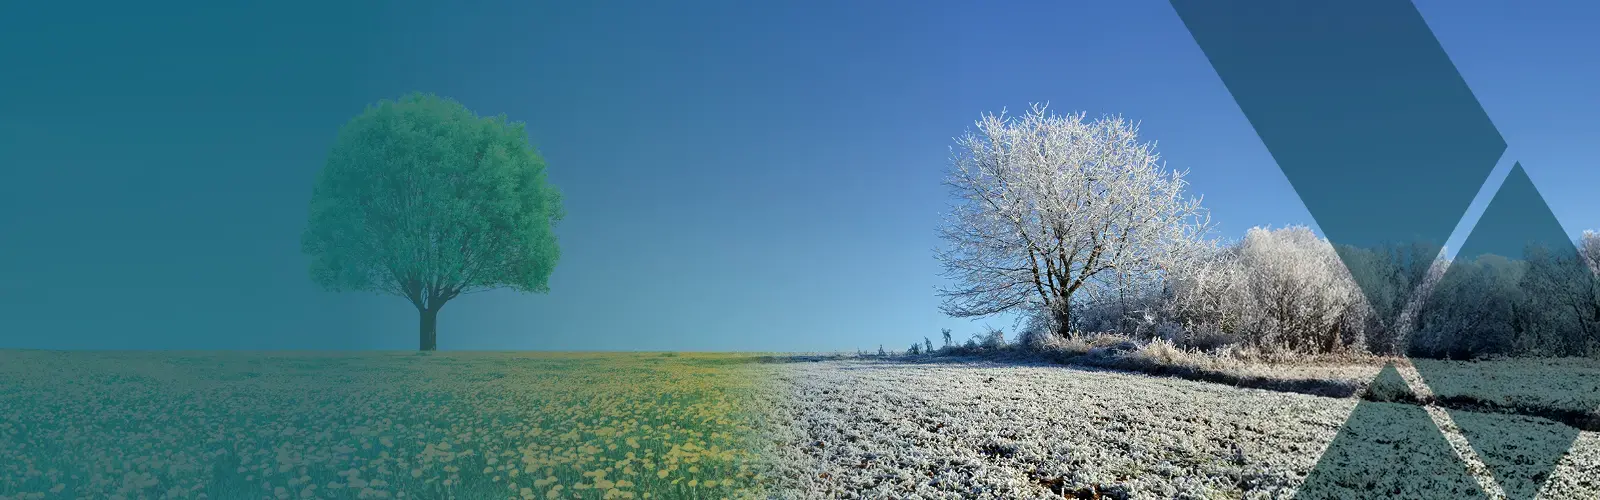 Tree and field covered in snow on one side and tree and field with green grass and flowers on the other side 